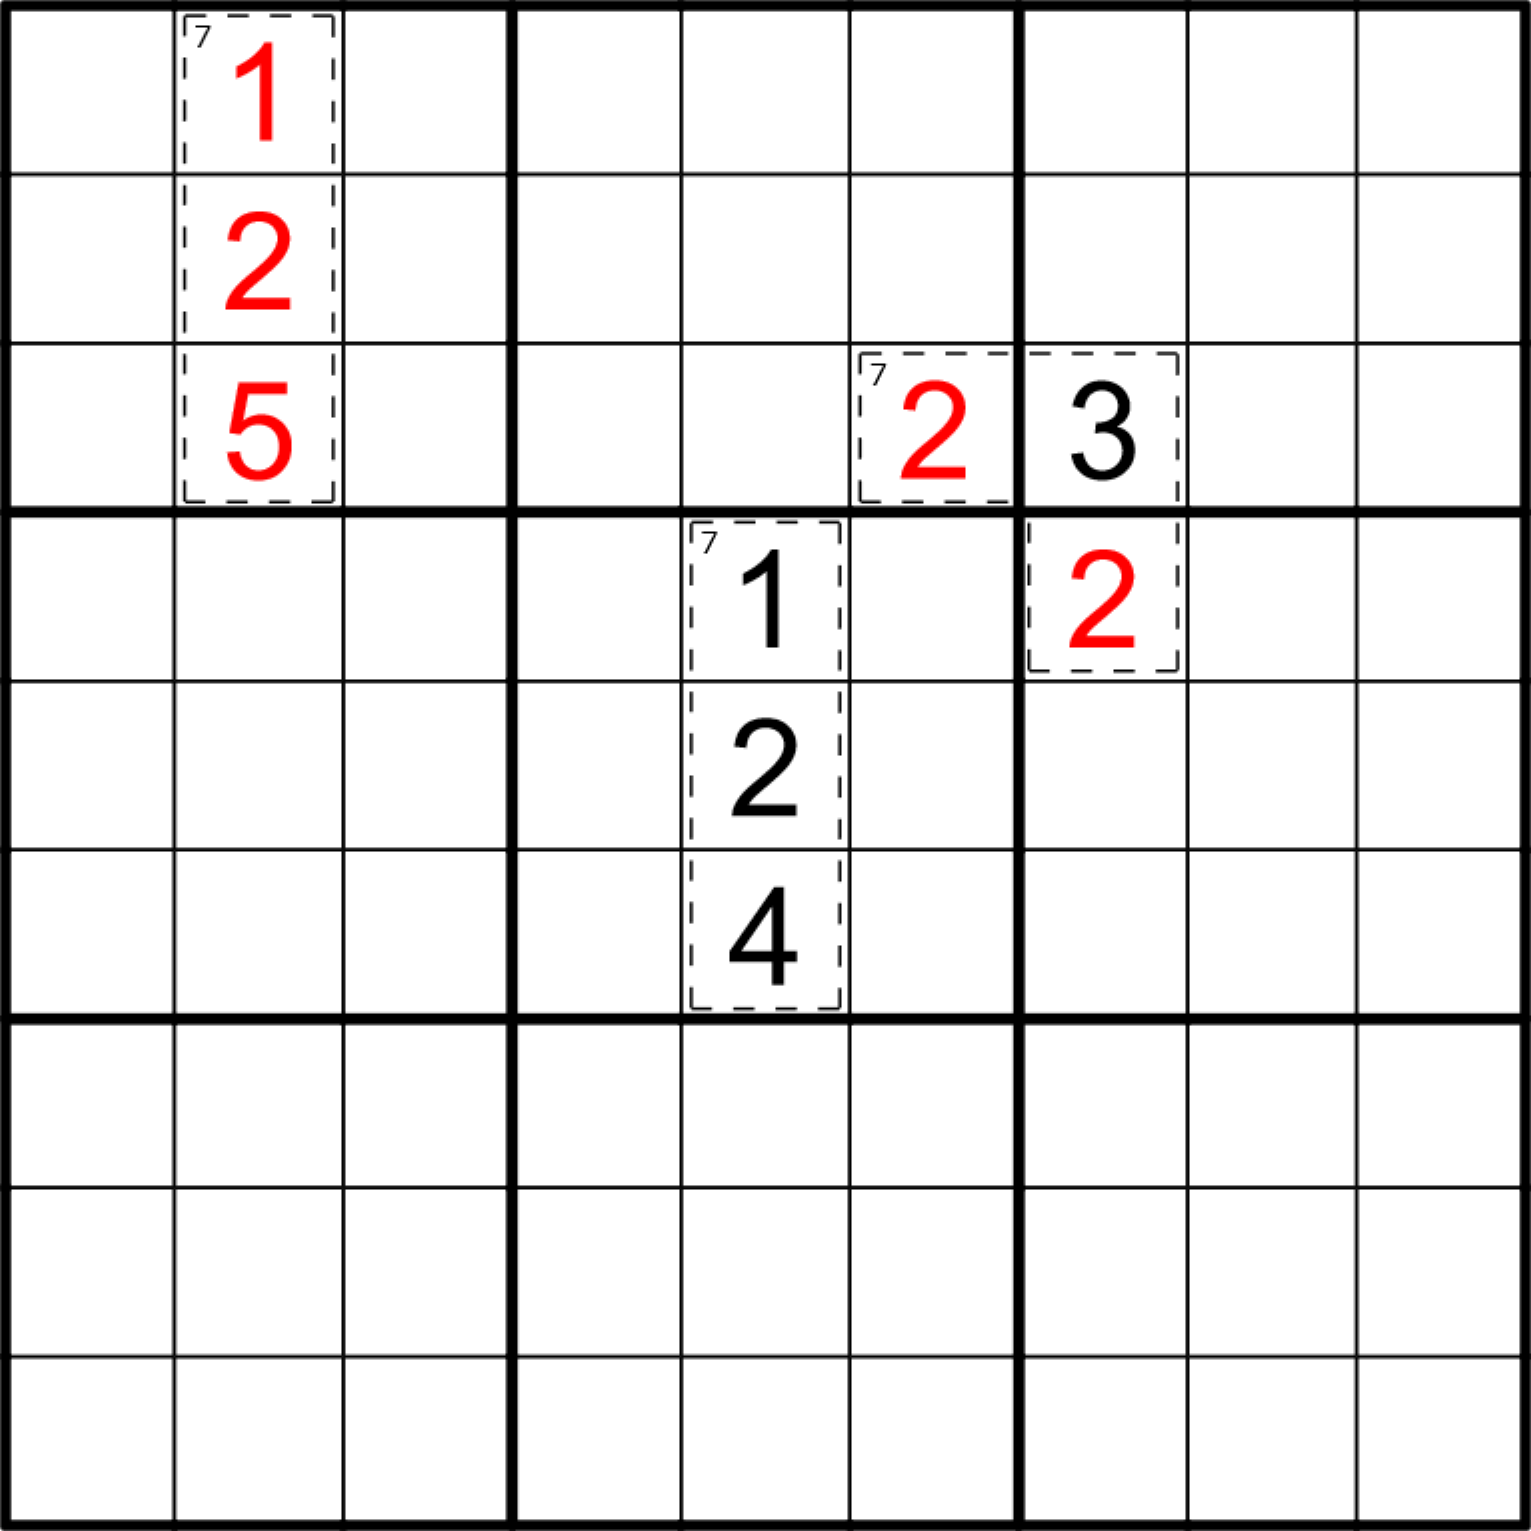 Sudoku grid, with three killer cages that are marked as grouped together. The first killer cage is in the 3×3 box in the top left corner of the grid. The middle column of that box forms the cage, with the followings cells from top to bottom: first cell contains a 1 and a pencil mark of 7, indicating a cage sum of 7, second cell contains a 2, third cell contains a 5. The numbers are highlighted in red to indicate a mistake. The second killer cage is in the central 3×3 box of the grid. The middle column of that box forms the cage, with the followings cells from top to bottom: first cell contains a 1 and a pencil mark of 7, indicating a cage sum of 7, second cell contains a 2, third cell contains a 4. None of the numbers in this cage are highlighted and therefore don't contain any mistakes. The third killer cage follows the outside corner of the central 3×3 box of the grid. It is made up of the following three cells: the top left cell of the cage contains a 2, highlighted in red, and a cage sum of 7. The top right cell of the cage contains a 3. The bottom right cell of the cage contains a 2, highlighted in red. All other cells are empty.